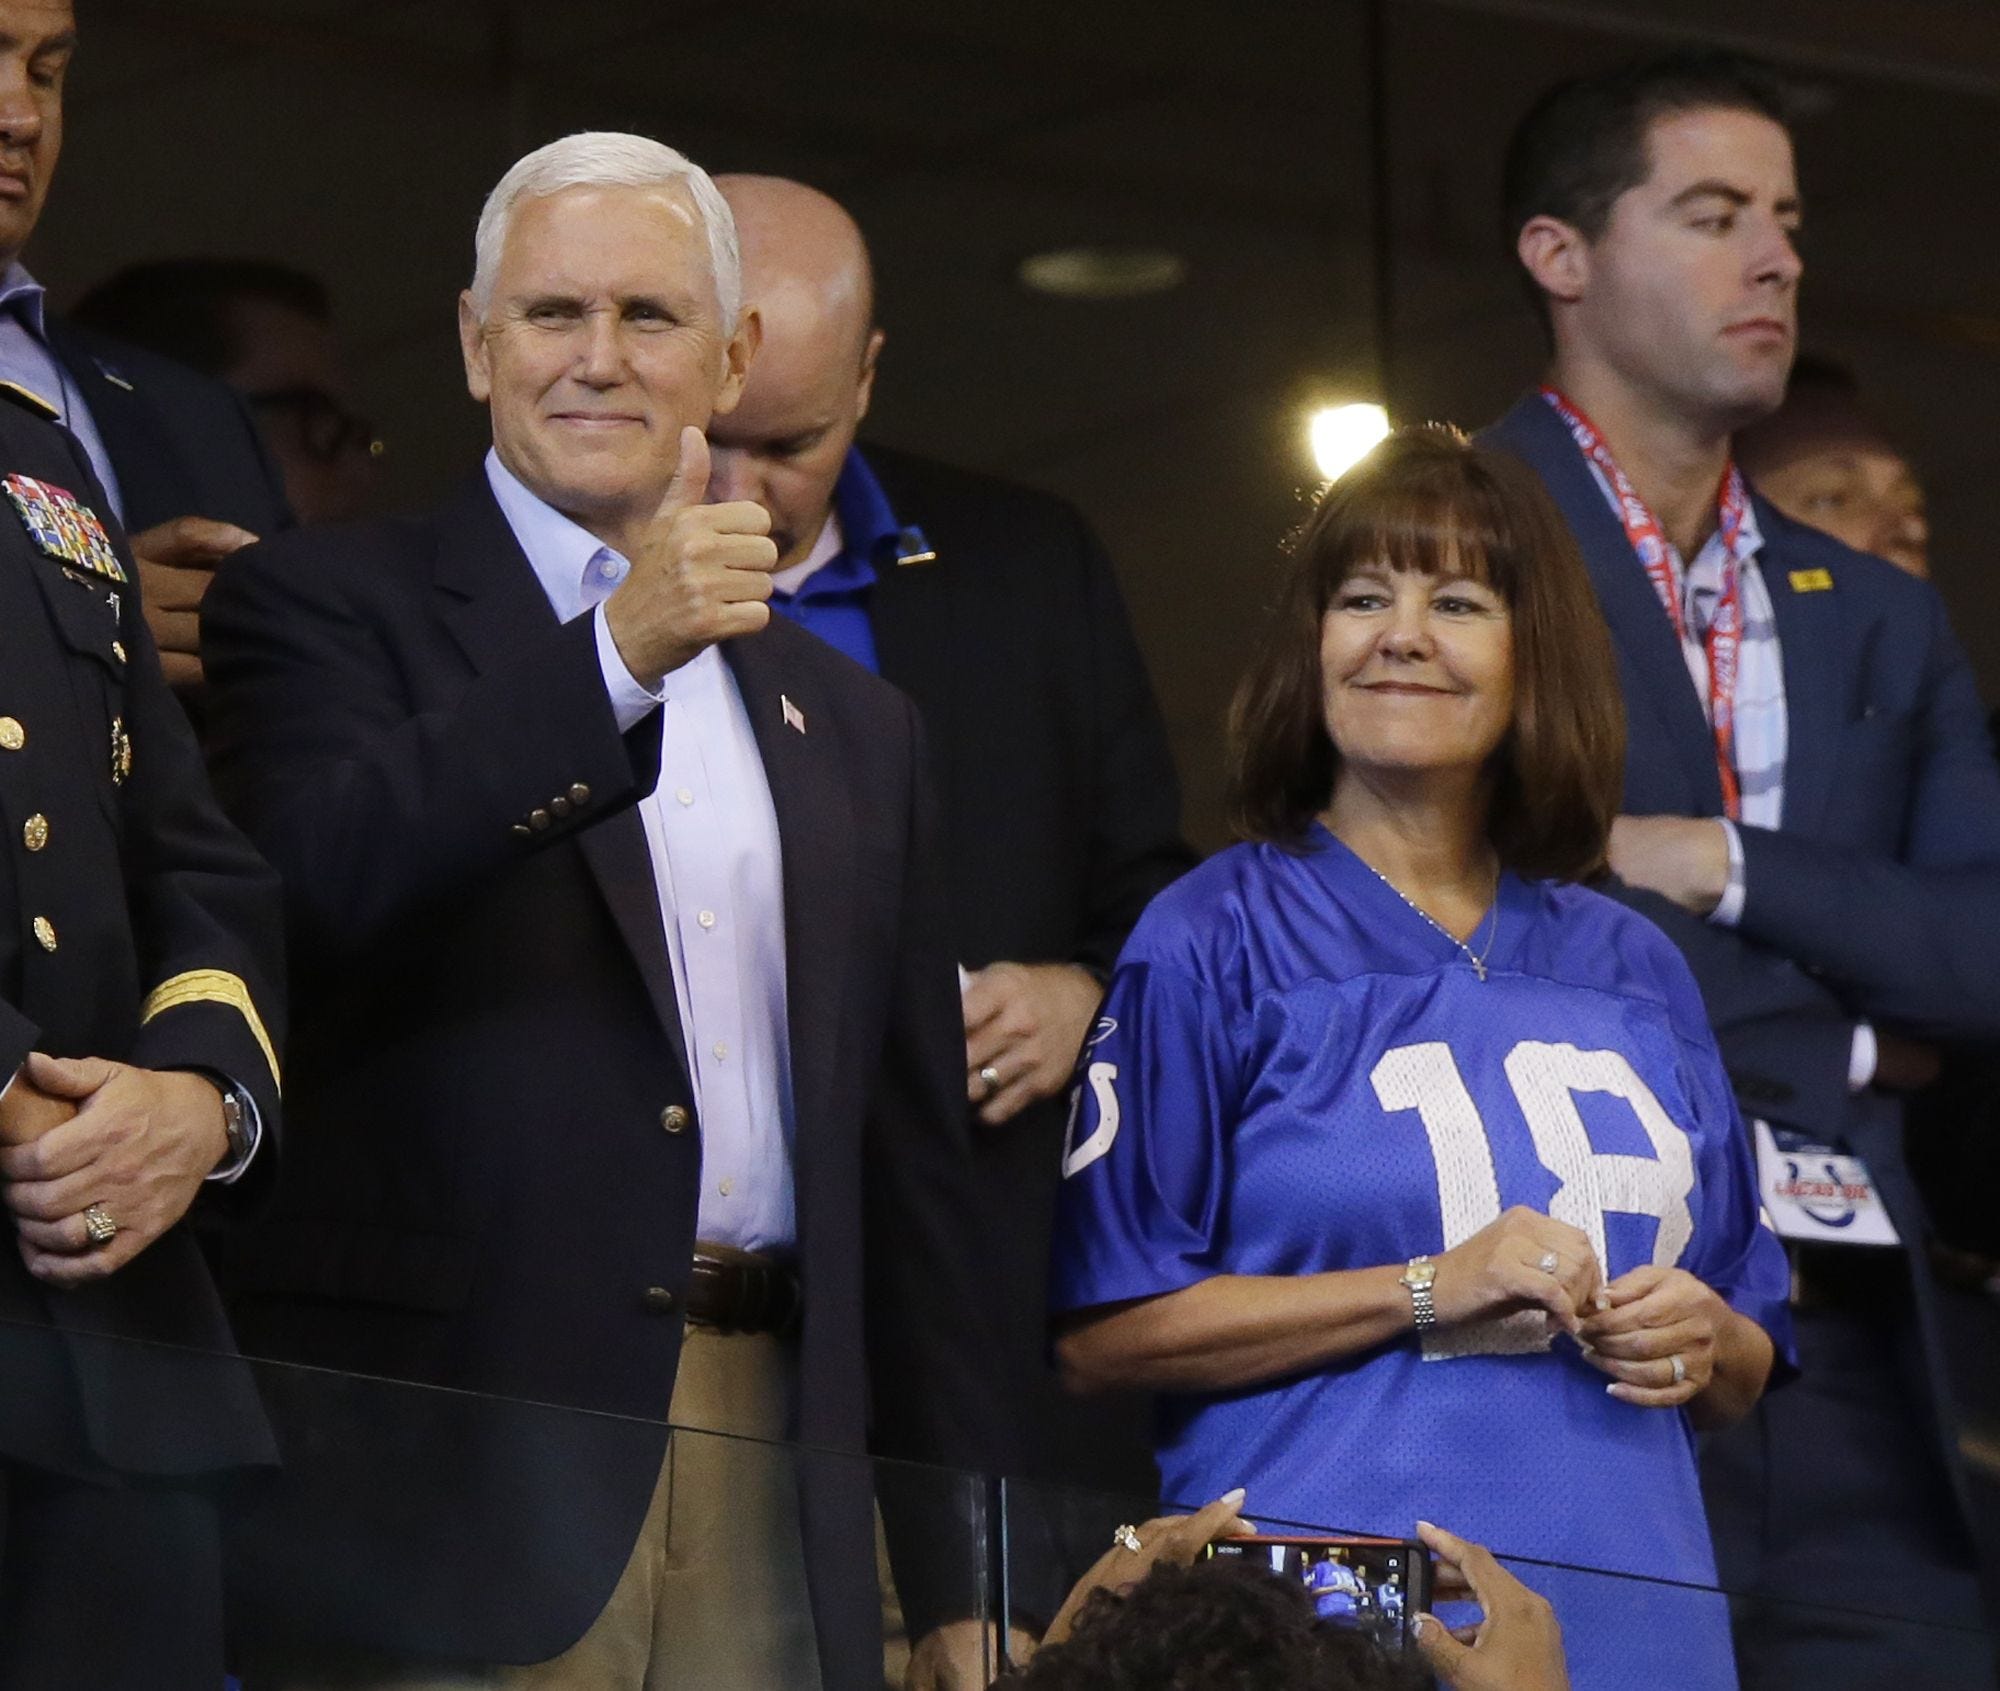 The real mockery of national anthem was by Vice President Pence